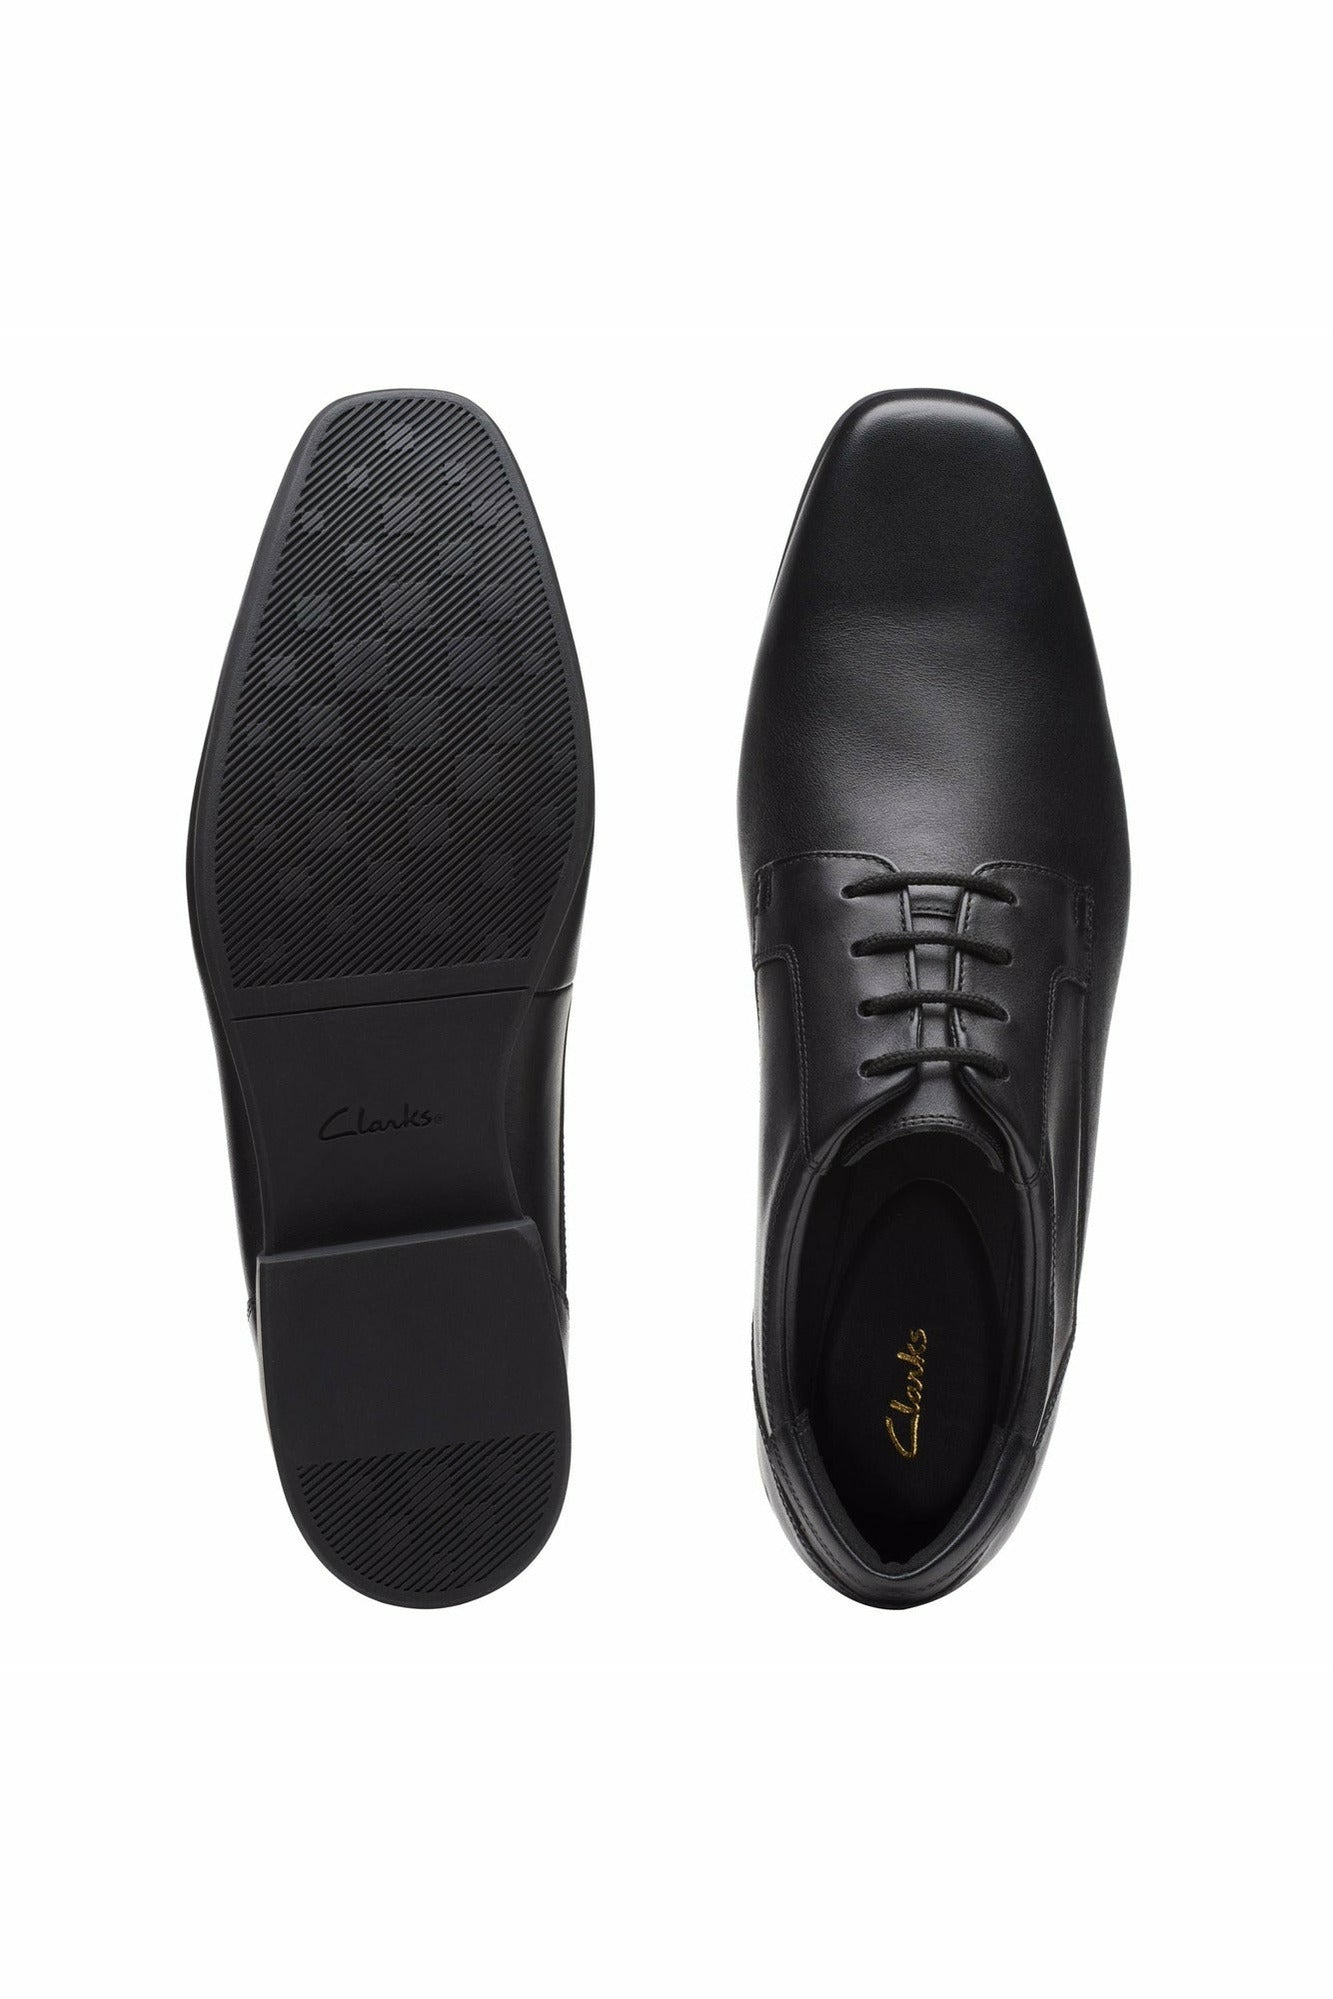 Clarks Mens Sidton Lace in Black Leather